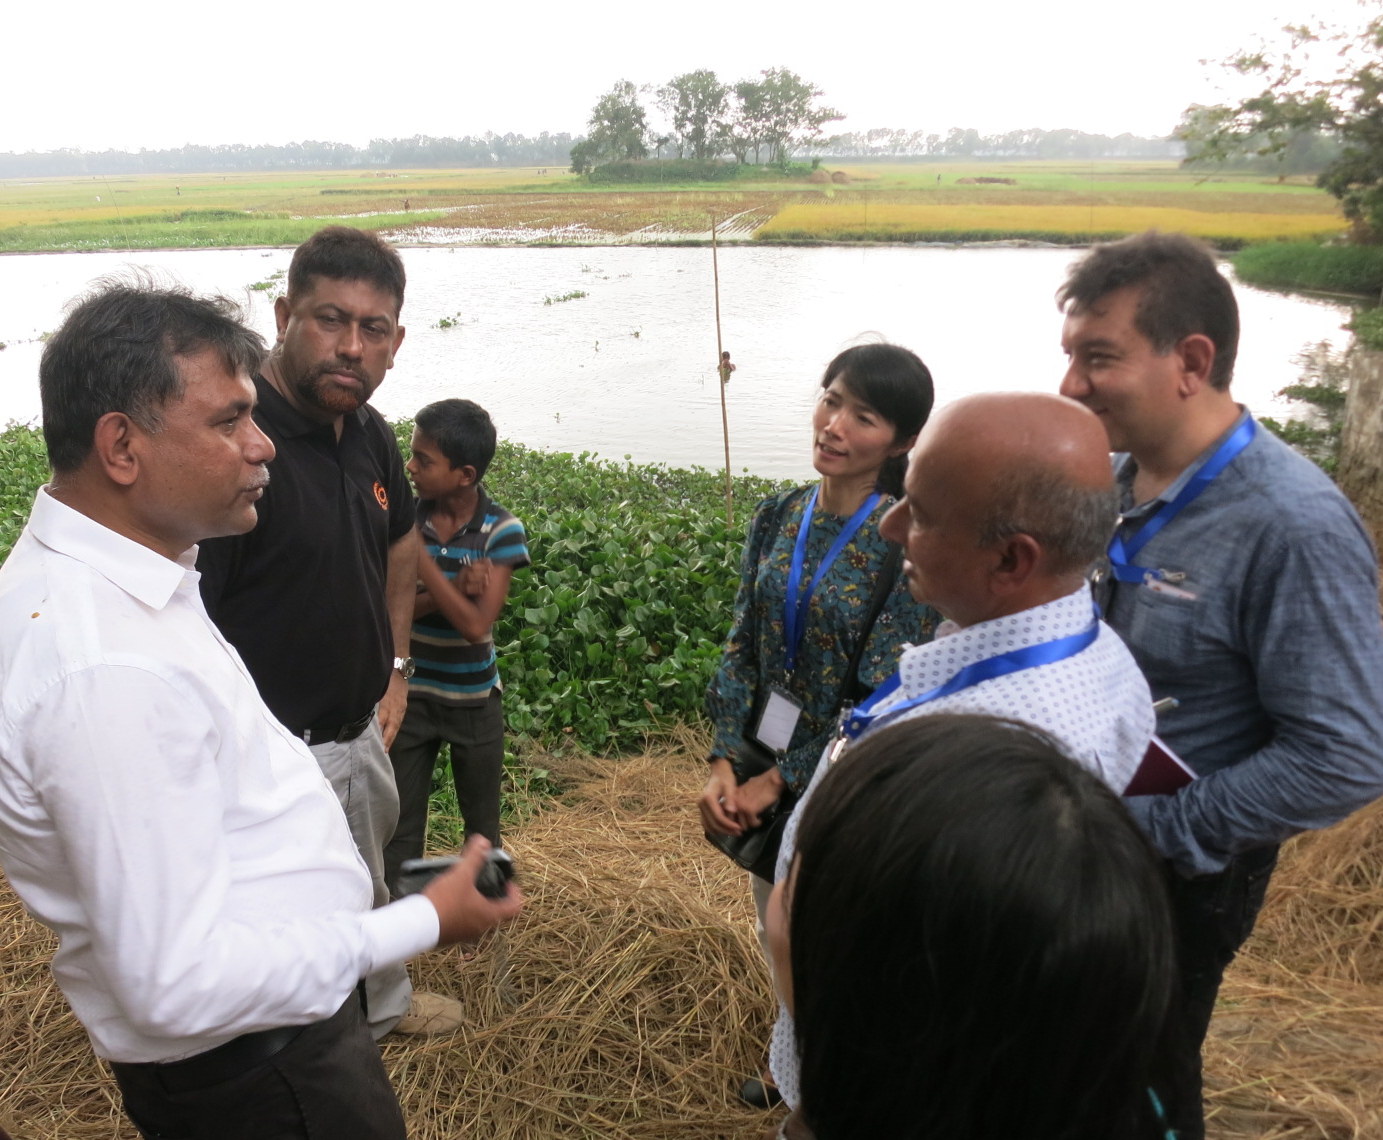 Participants getting the first-hand experience of Integrated Farming activities and “new-generation development approach” of SHISUK in Daudkandi, Comilla District of Bangladesh.